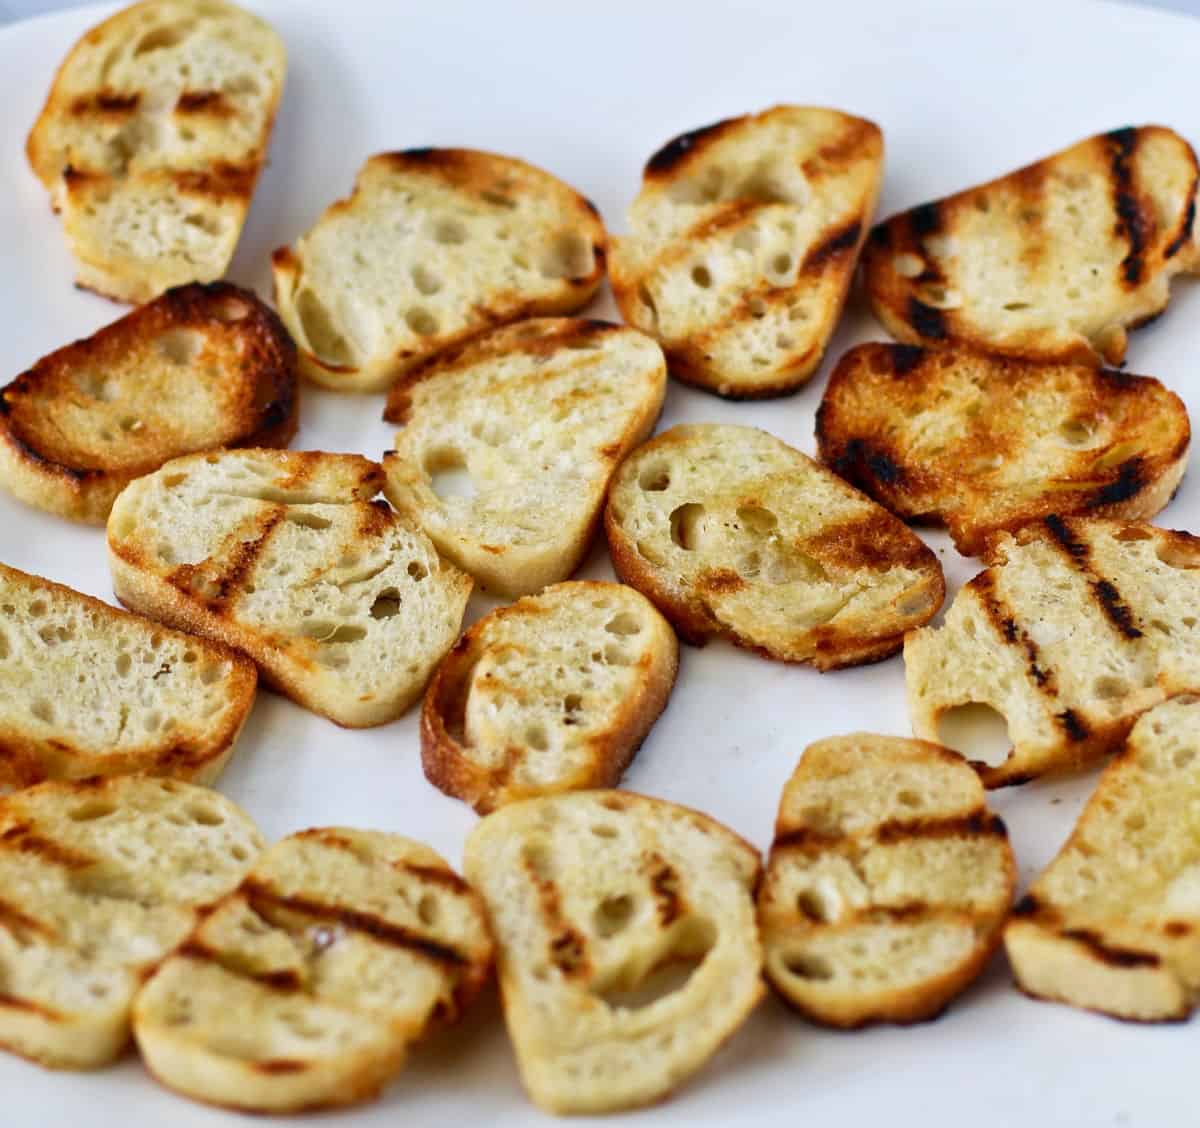 Grilled baguette croutons on a plate.